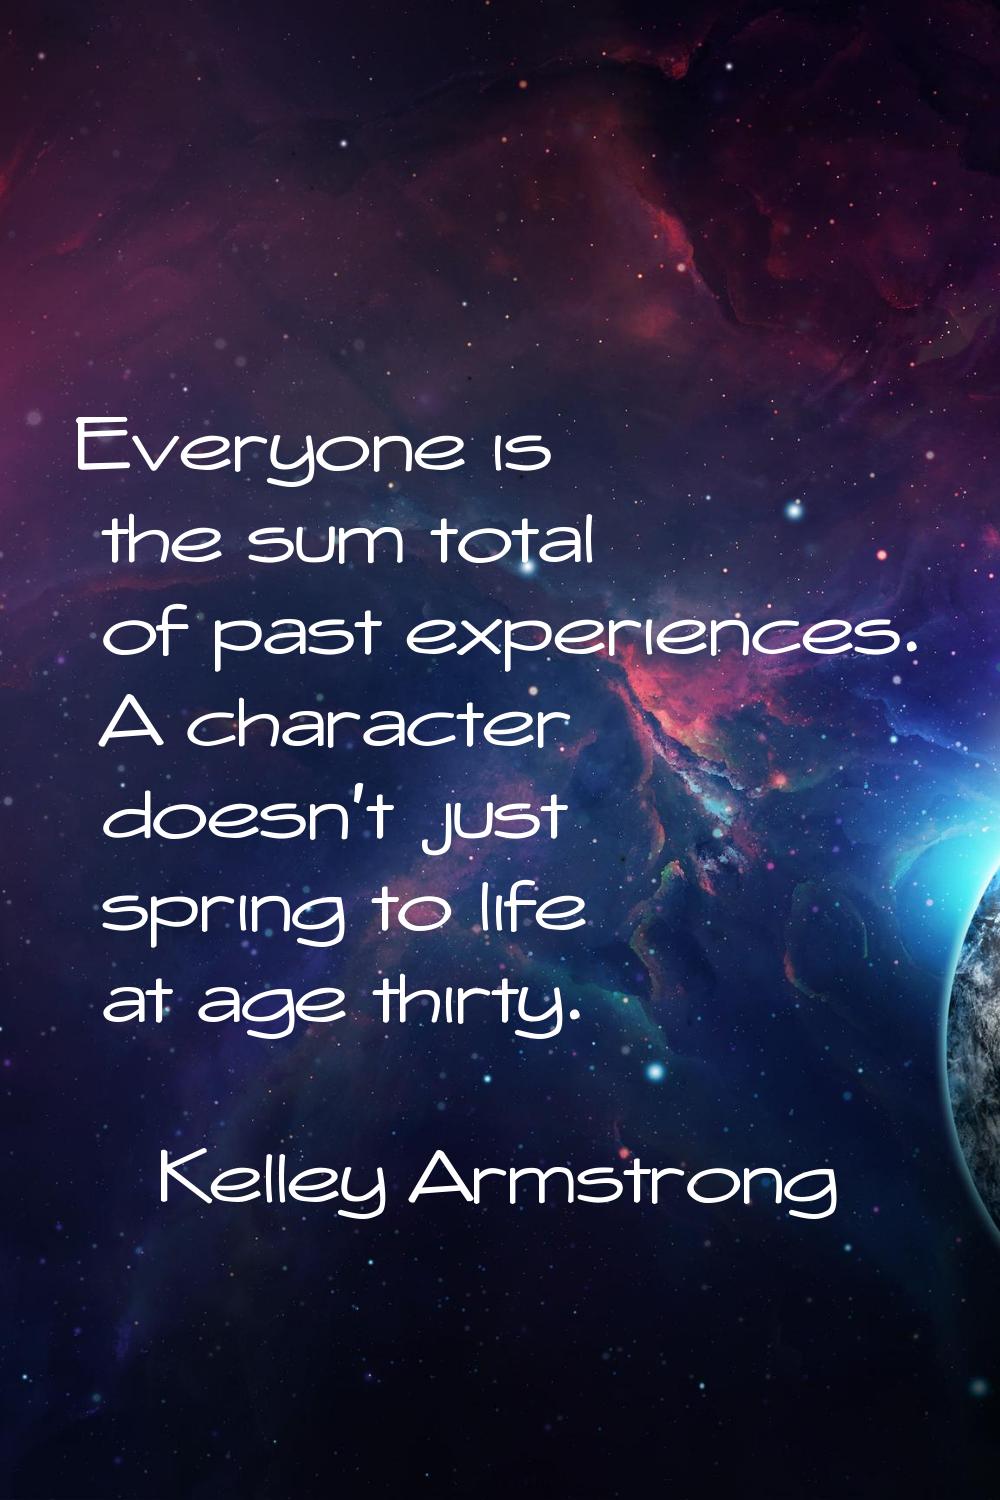 Everyone is the sum total of past experiences. A character doesn't just spring to life at age thirt